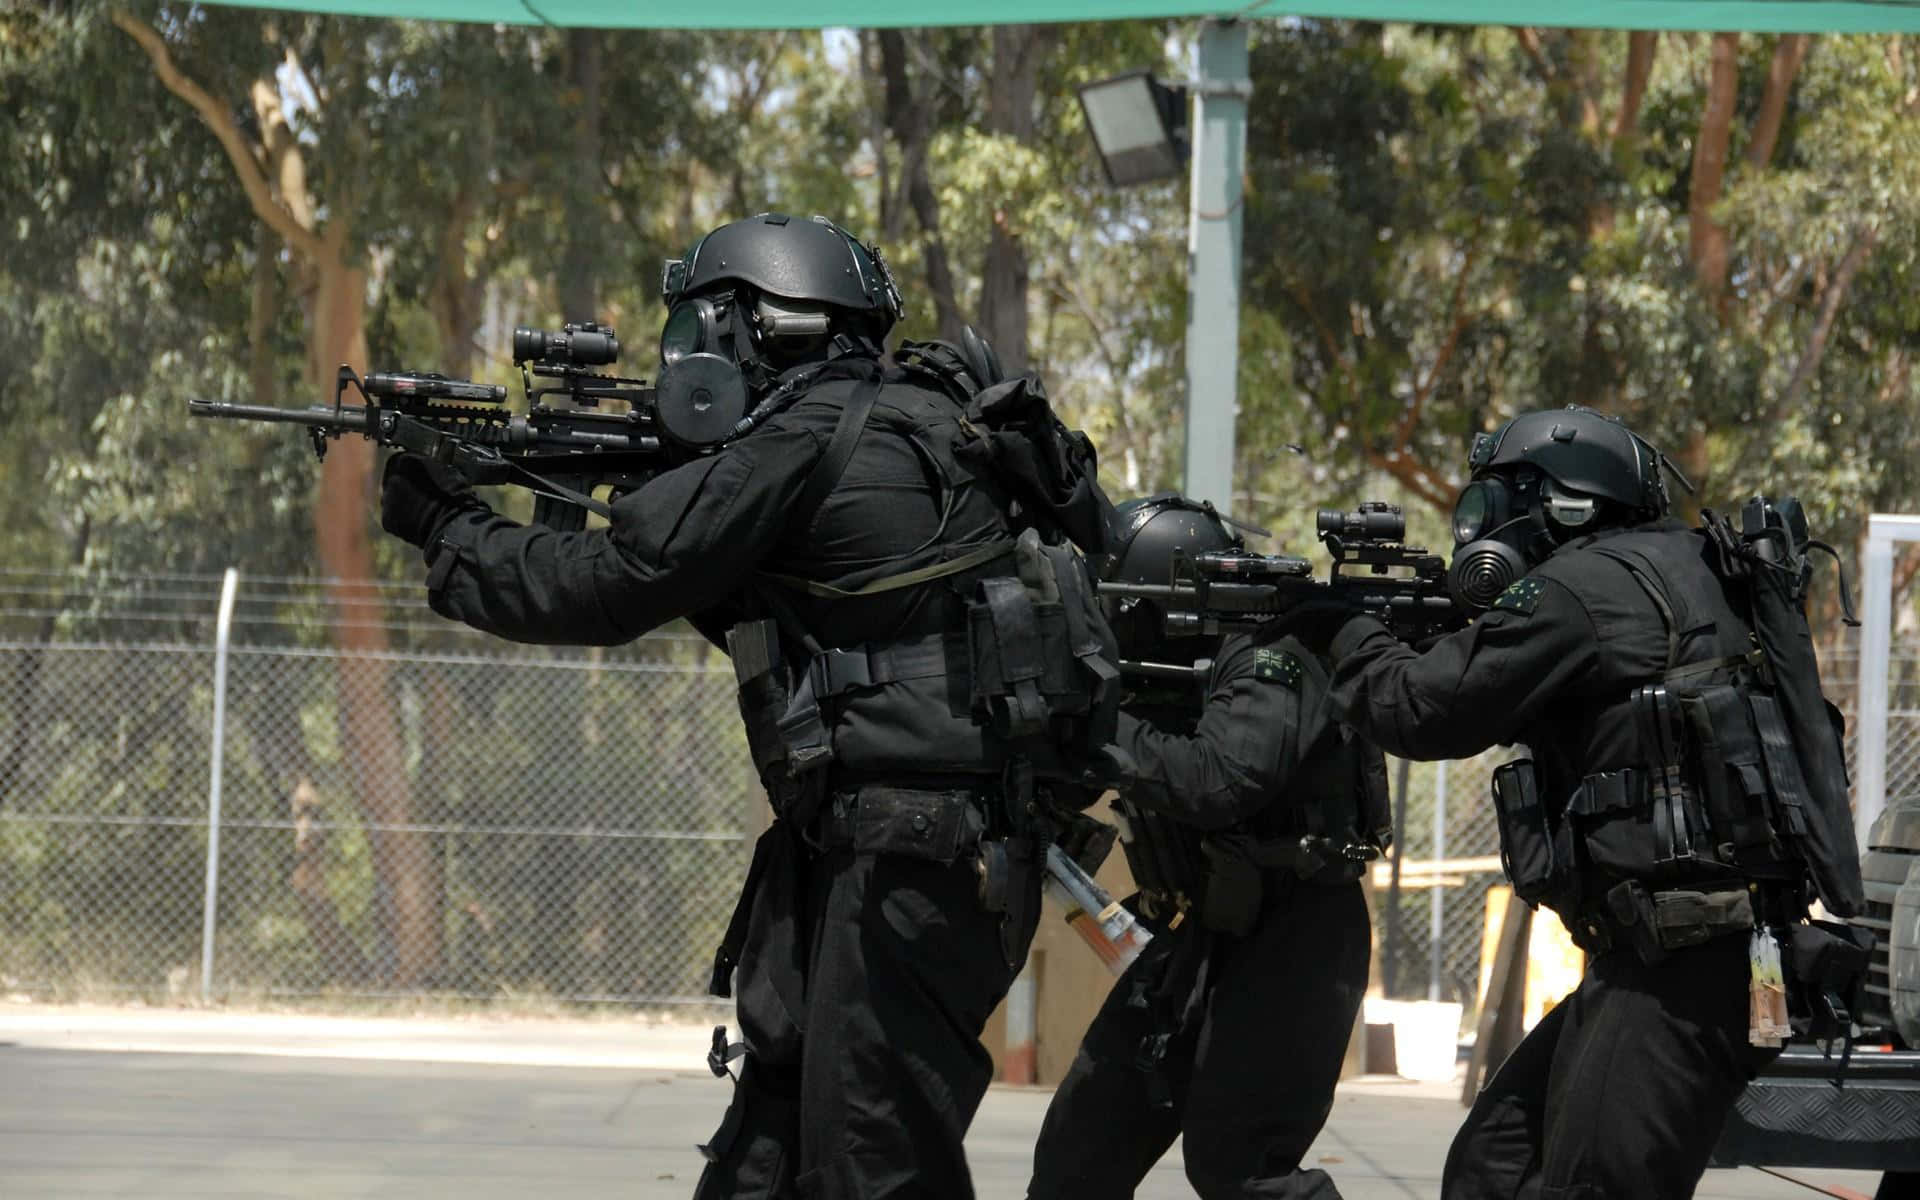 "The Swat Unit at the Ready" Wallpaper